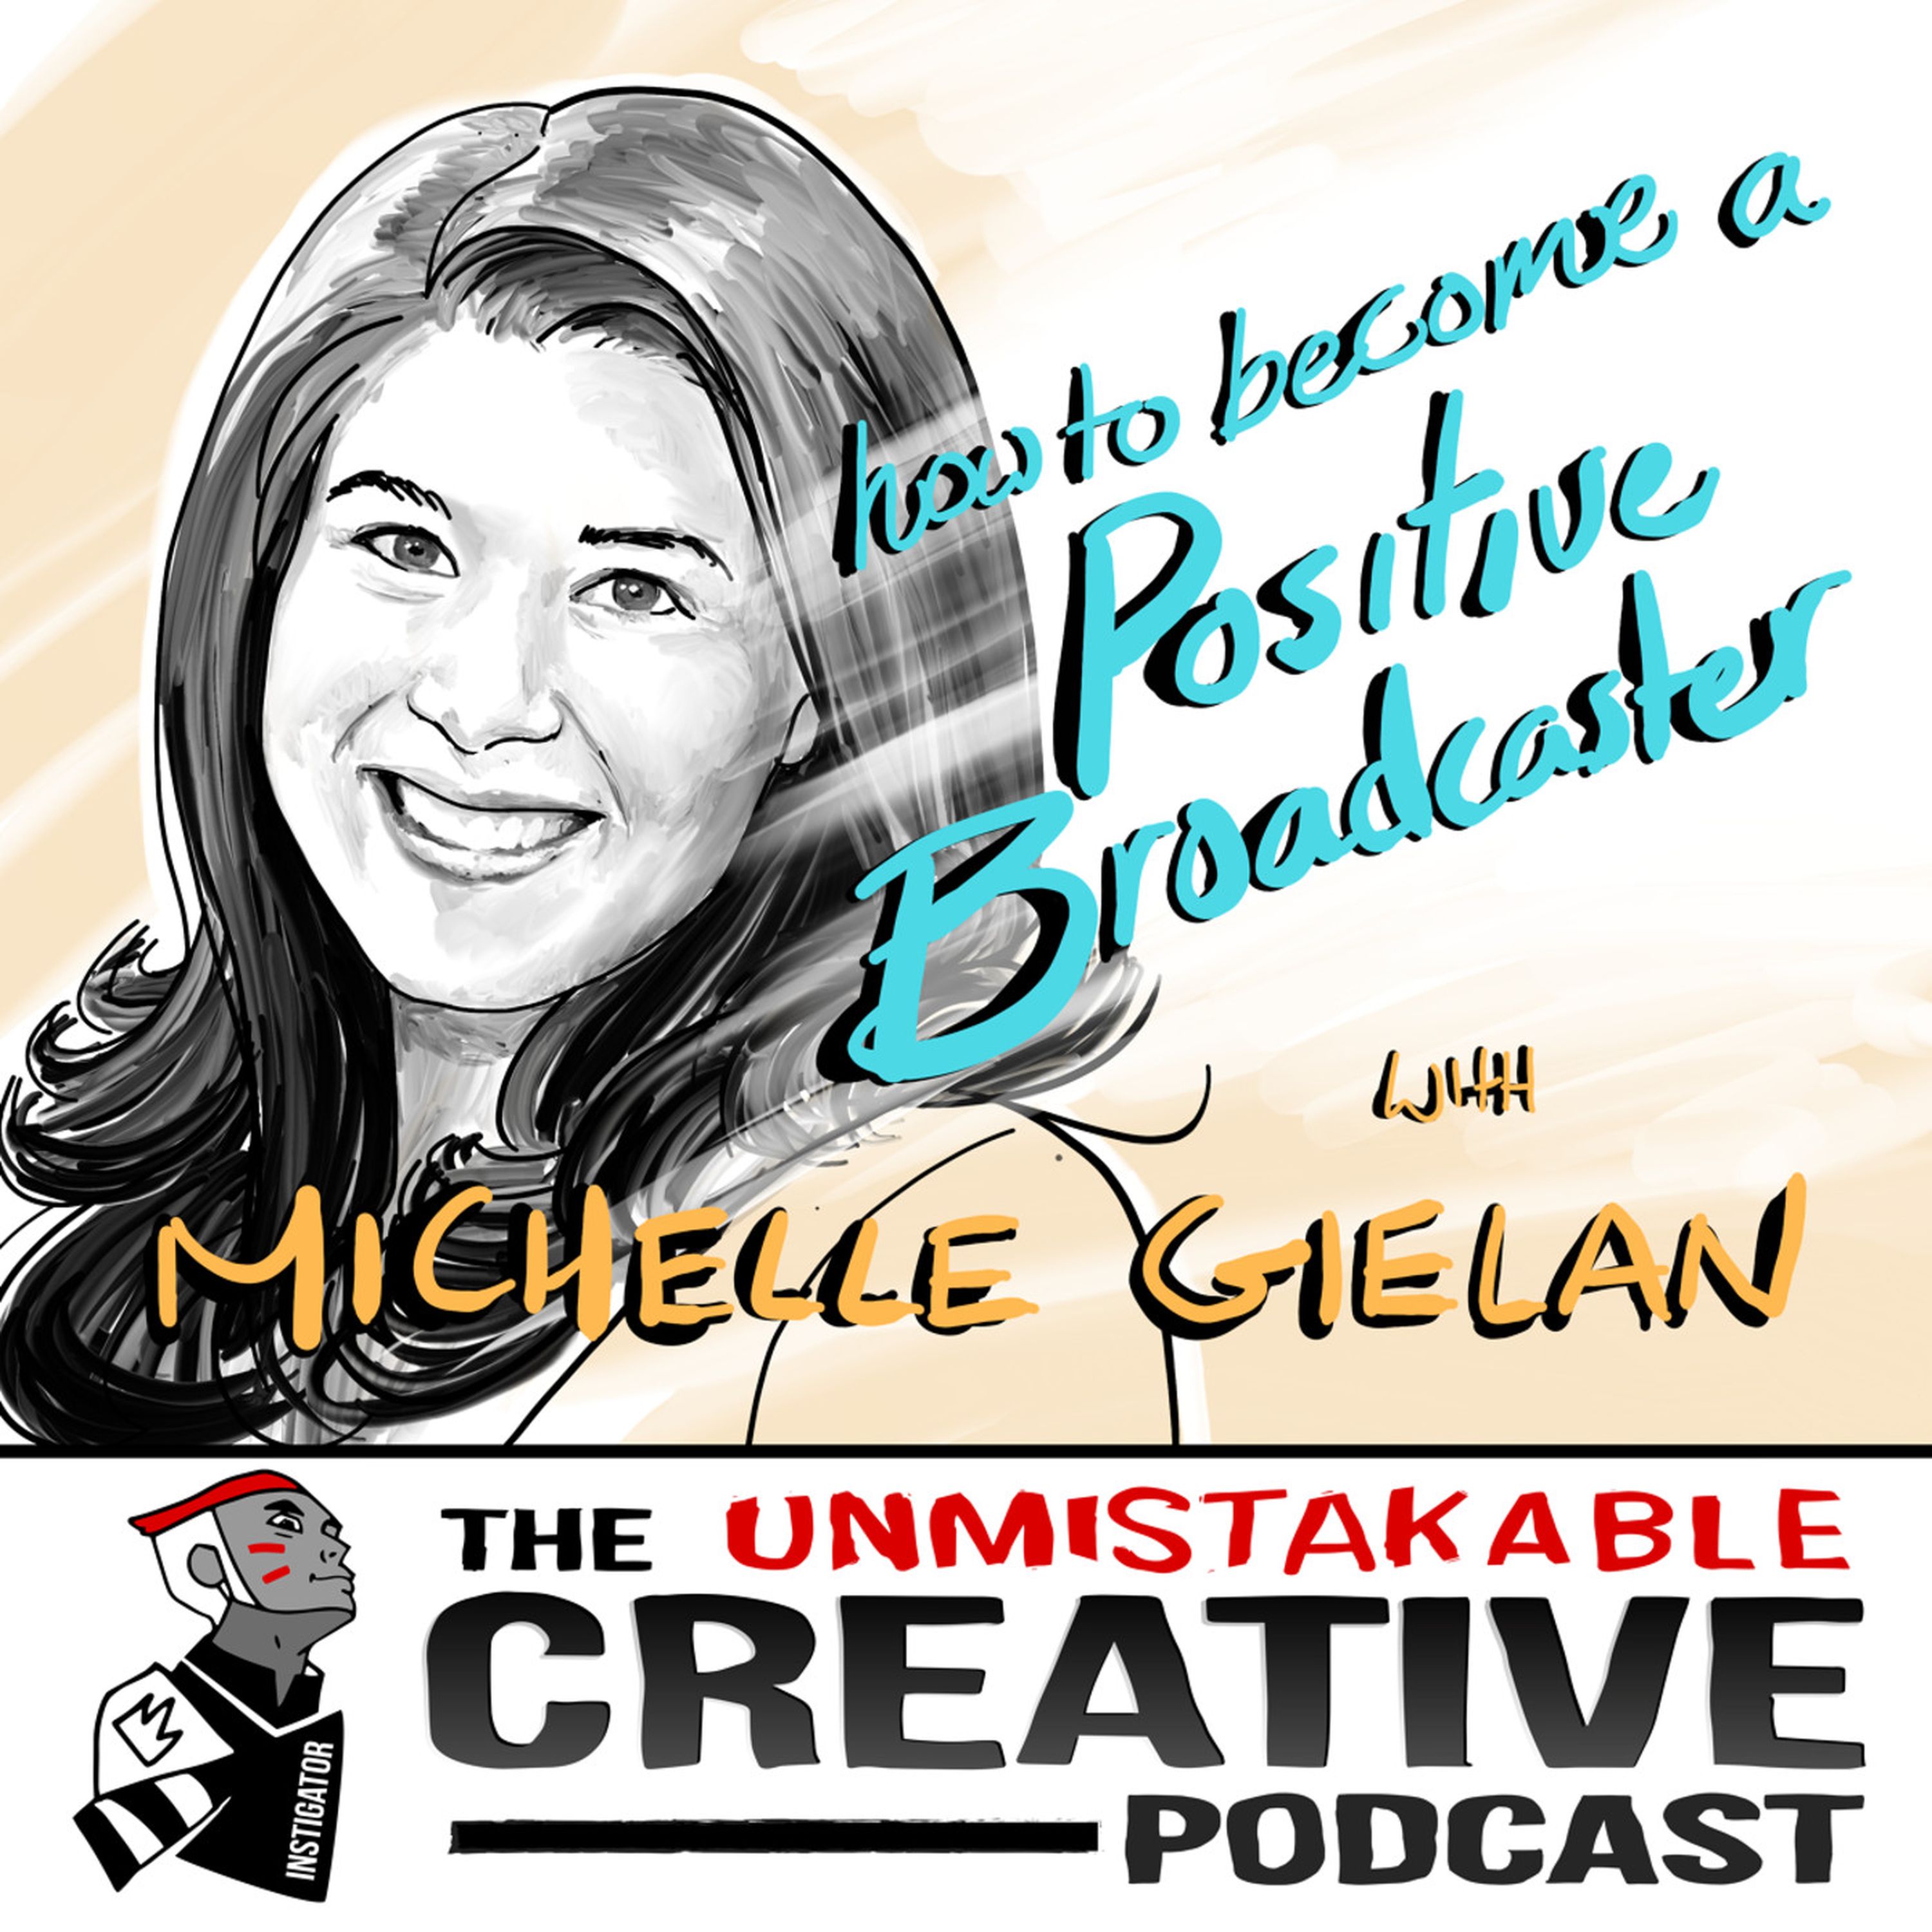 How to Become a Positive Broadcaster with Michelle Gielan Image